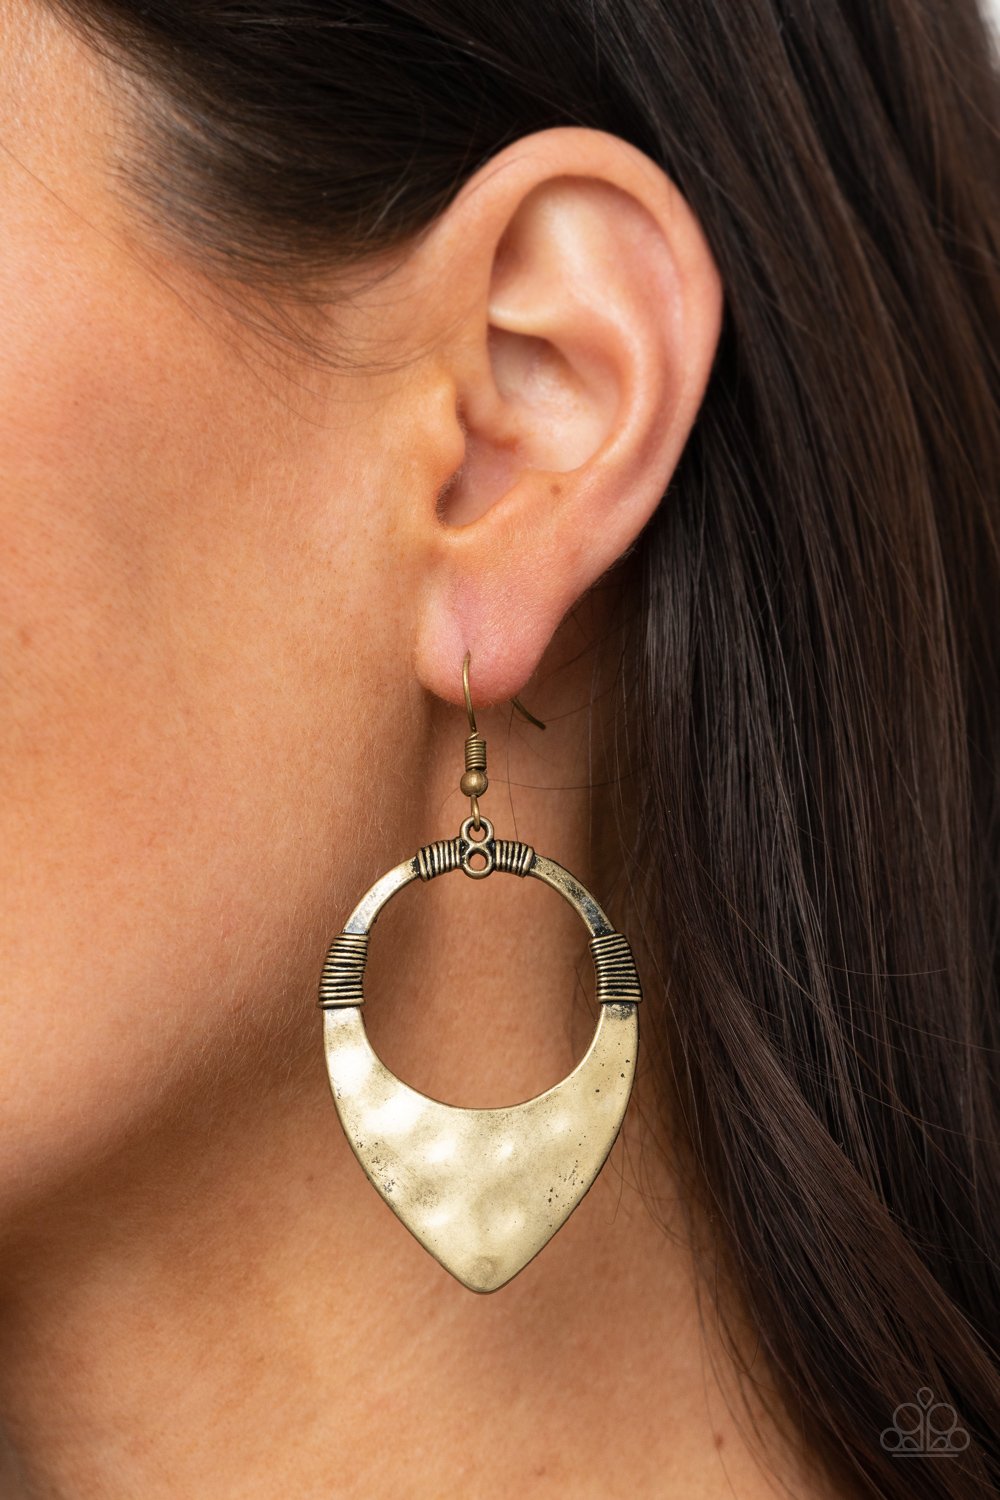 &lt;p&gt;Featuring faux wire wrap details, a hammered brass teardrop-like frame swings from the ear for an artisan inspired look. Earring attaches to a standard fishhook fitting. &lt;/p&gt;  

&lt;p&gt; &lt;i&gt;  Sold as one pair of earrings. &lt;/i&gt;  &lt;/p&gt;


&lt;img src=\&quot;https://d9b54x484lq62.cloudfront.net/paparazzi/shopping/images/517_tag150x115_1.png\&quot; alt=\&quot;New Kit\&quot; align=\&quot;middle\&quot; height=\&quot;50\&quot; width=\&quot;50\&quot;&gt;